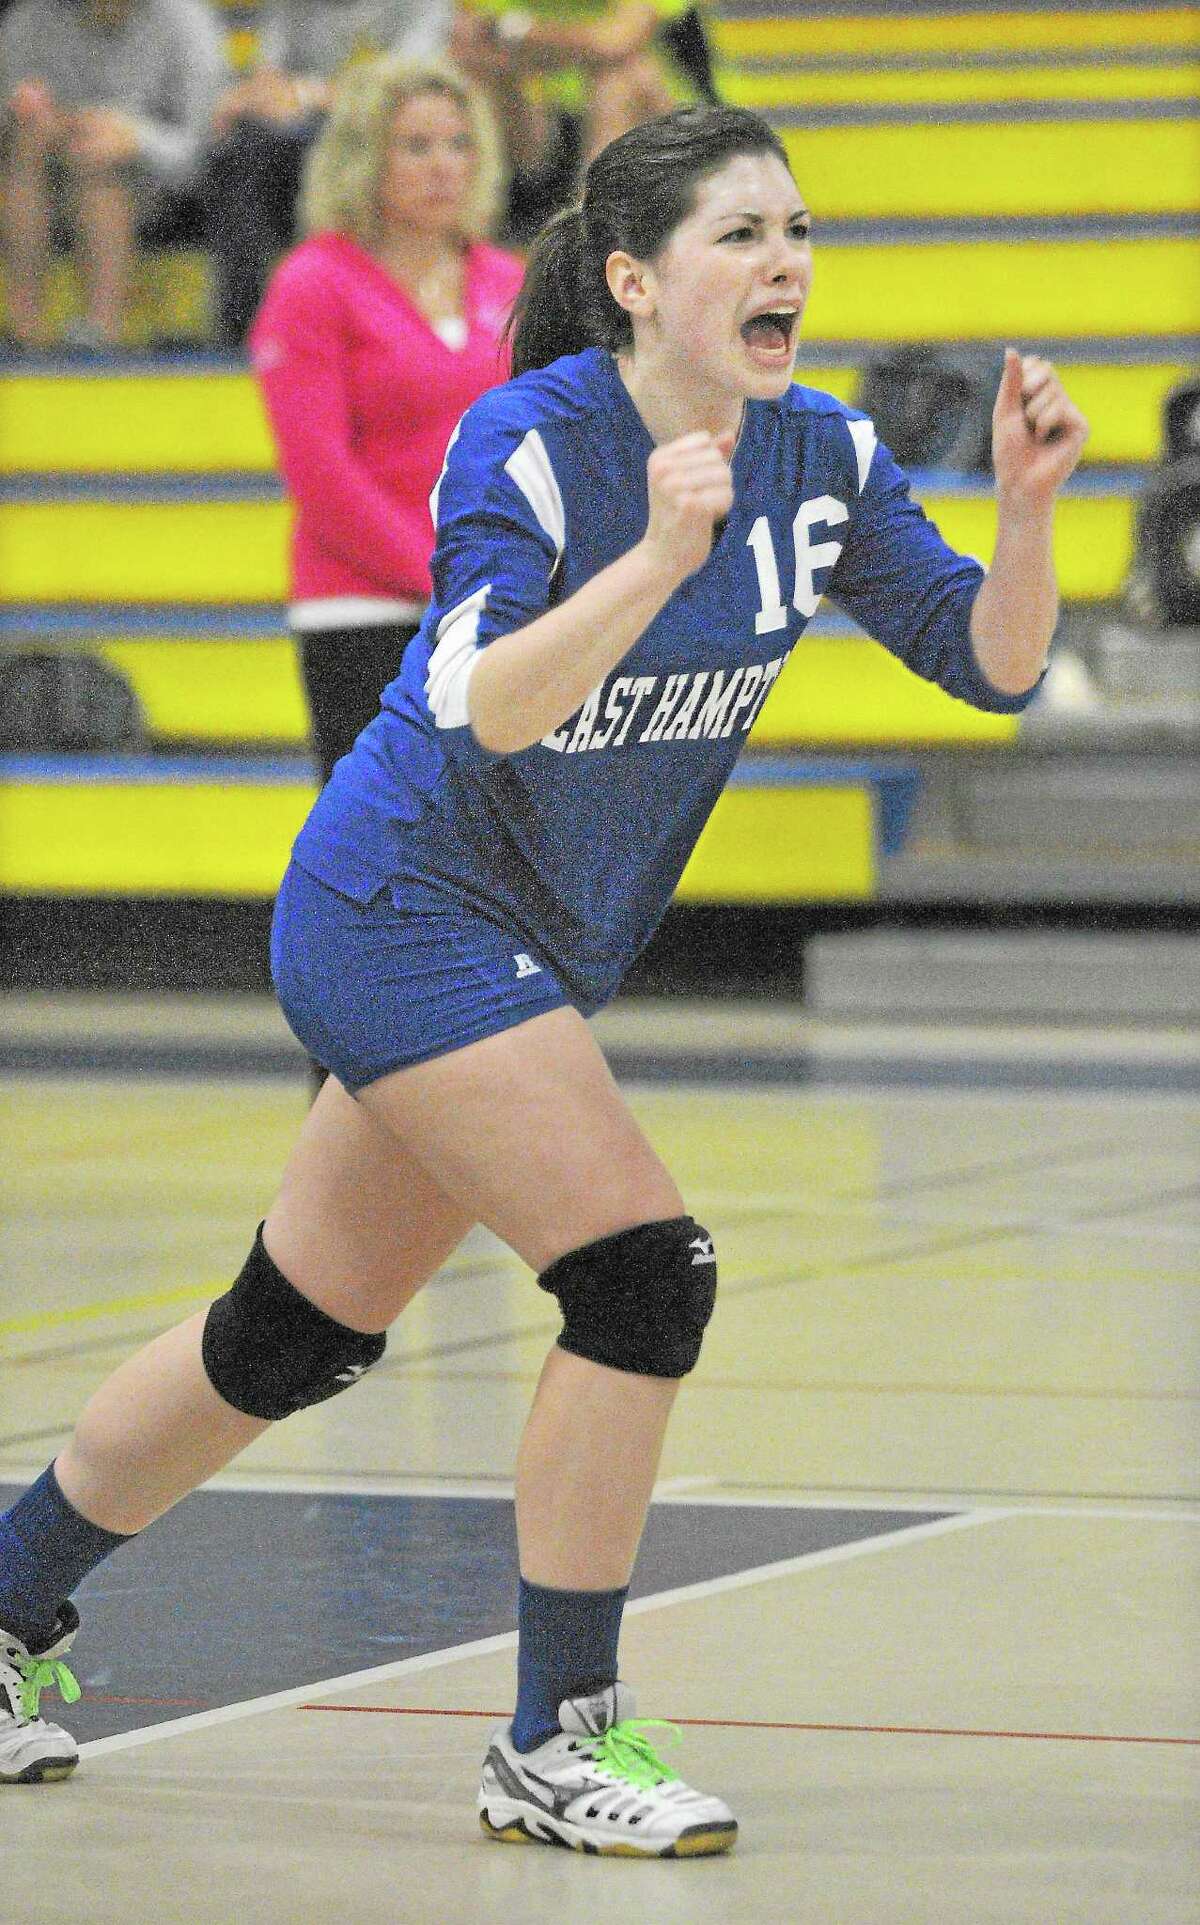 Catherine Avalone — The Middletown Press East Hampton’s Shayla Belanger is pumped after winning the second set, 26-24 against Haddam-Killingworth in a Shoreline Semifinal game Thursday afternoon in Higganum. Haddam-Killingworth won the first set, 25-10 and East Hampton won three sets, 26-24, 25-23 and 27-25. East Hampton won 3-1.